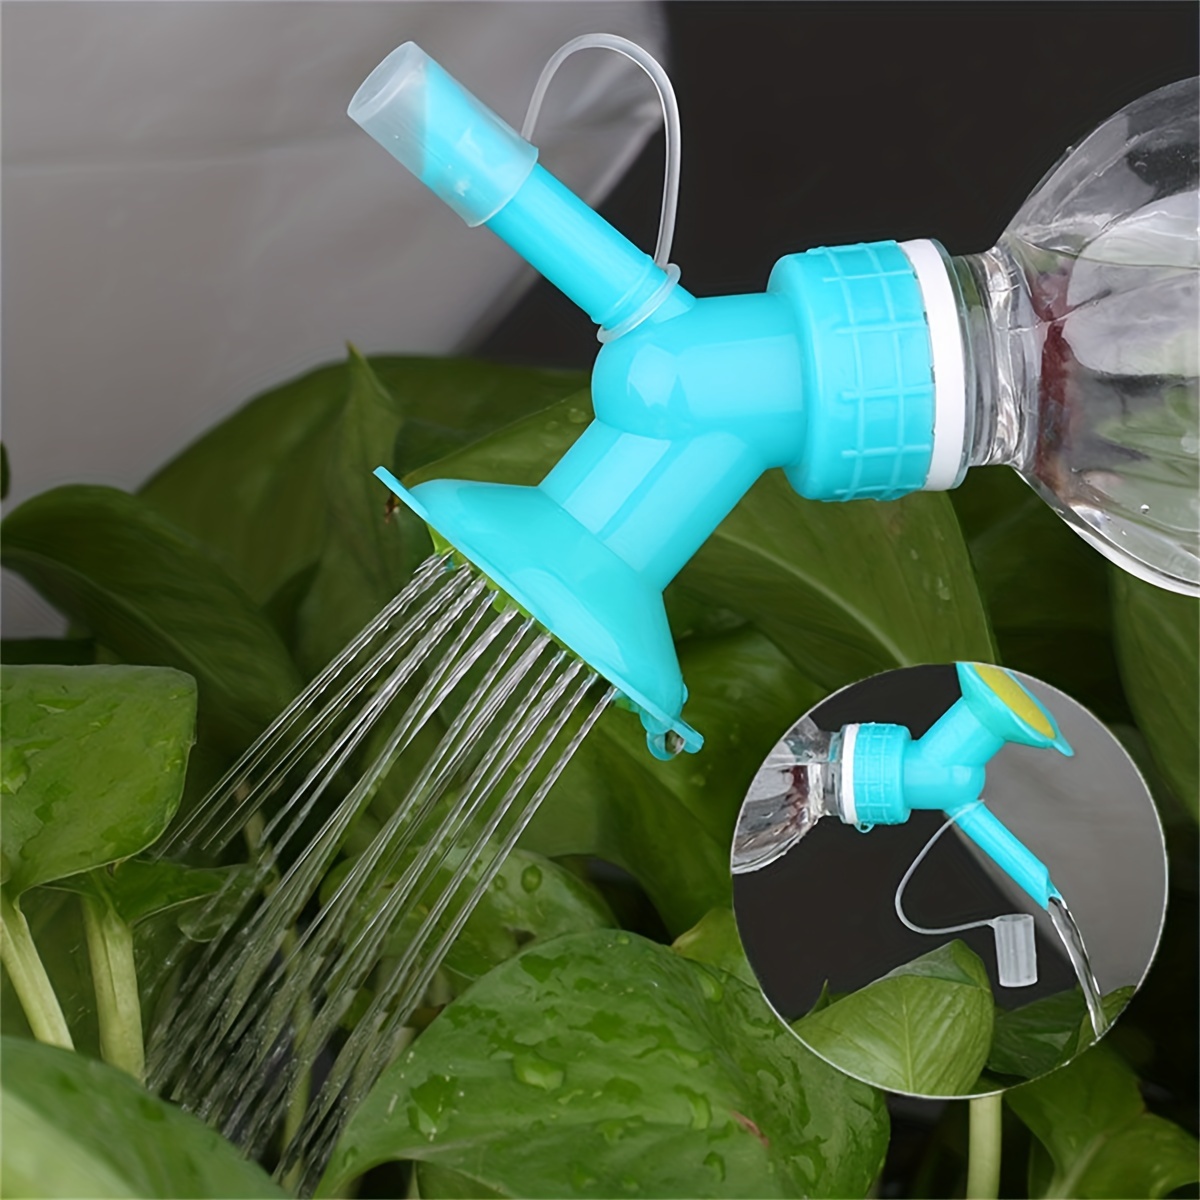 

1/3pcs, Upgrade Your Watering Routine With This Reusable, Dual-purpose Nozzle Head For Cola Bottles, Beverage Bottles Flower Sprinklers